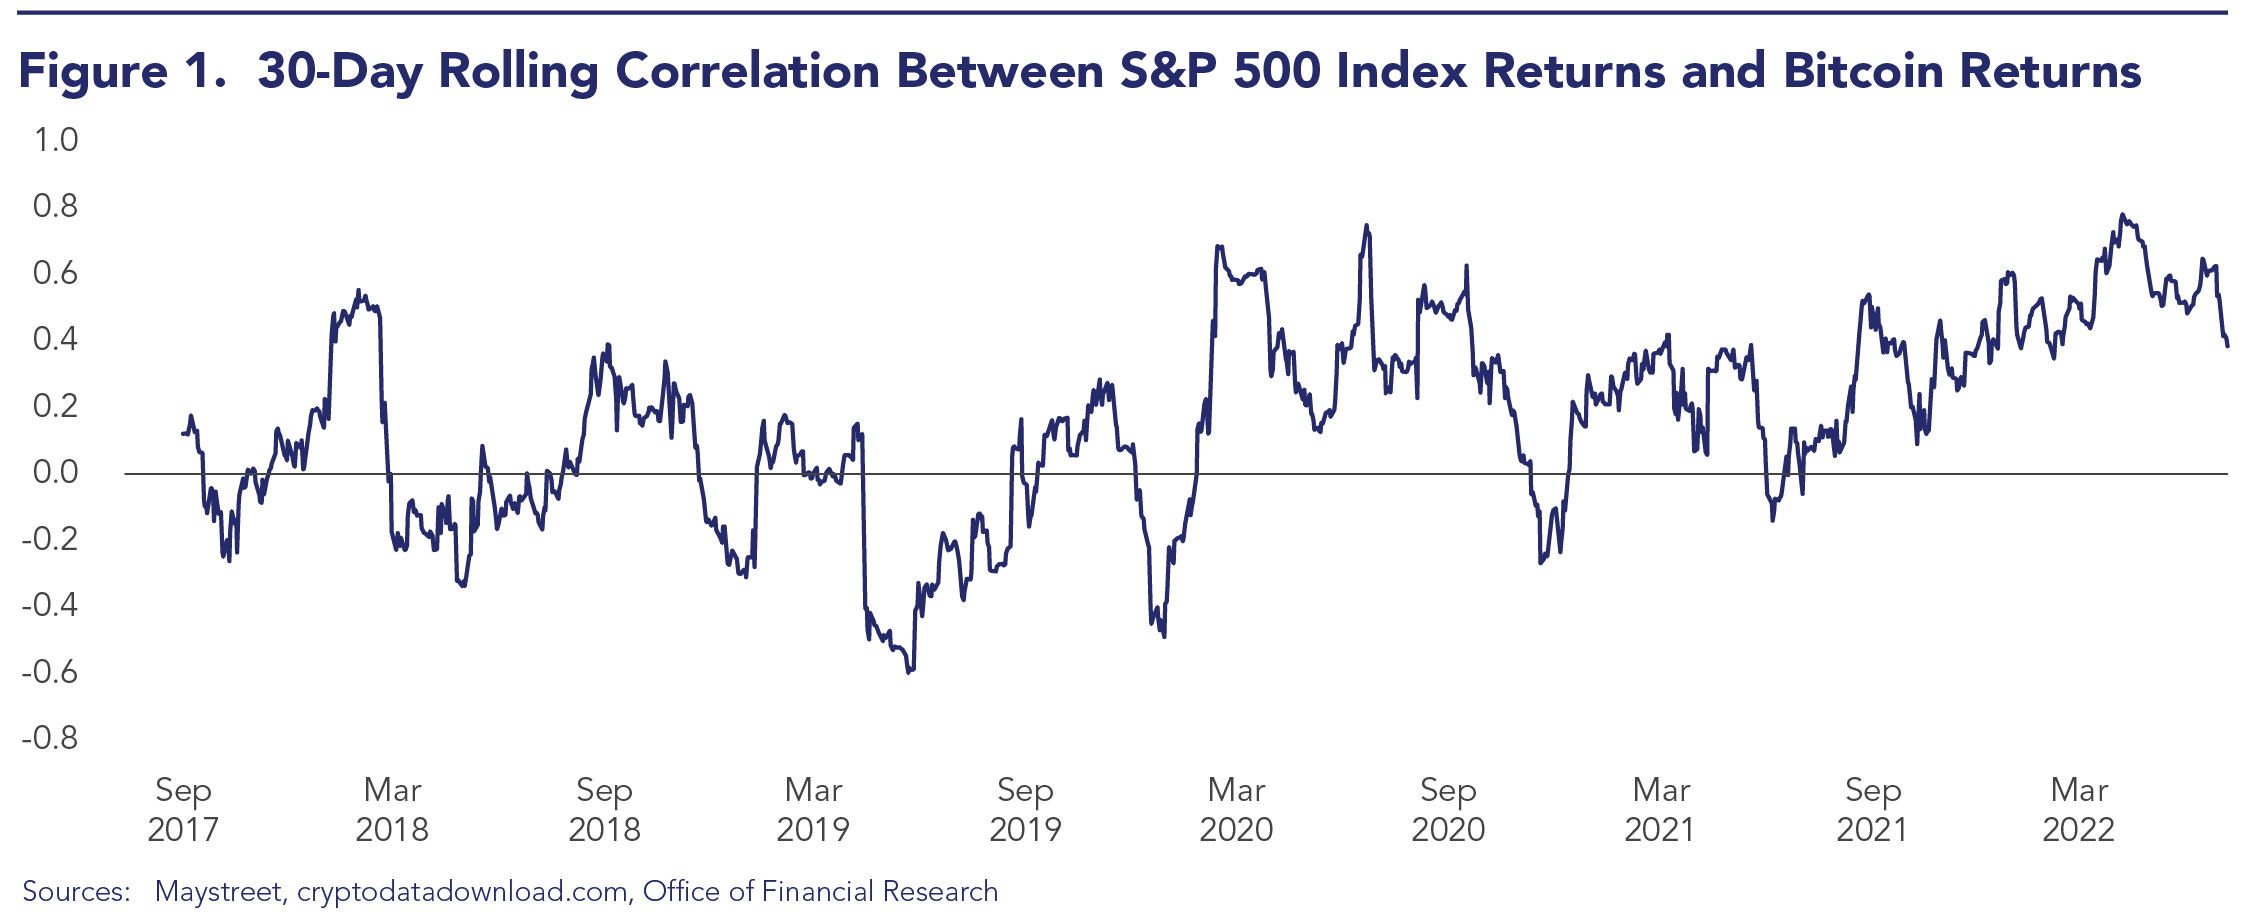 The 30-day rolling correlation between the S&P 500 and Bitcoin has recently increased noticeably.